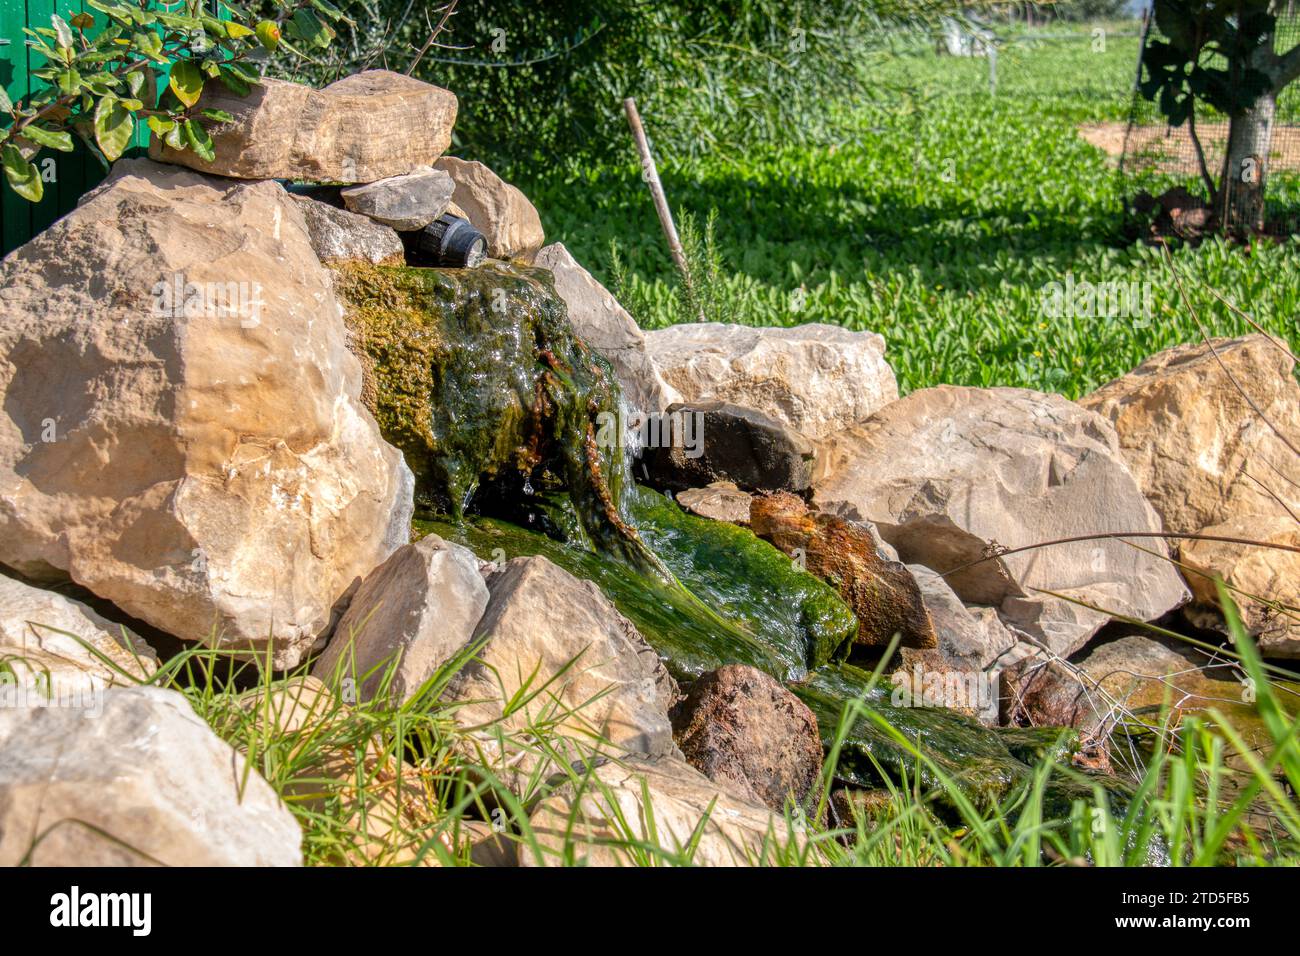 Fountain with rocks with verdigris from which the water flows decorating a garden. Stock Photo